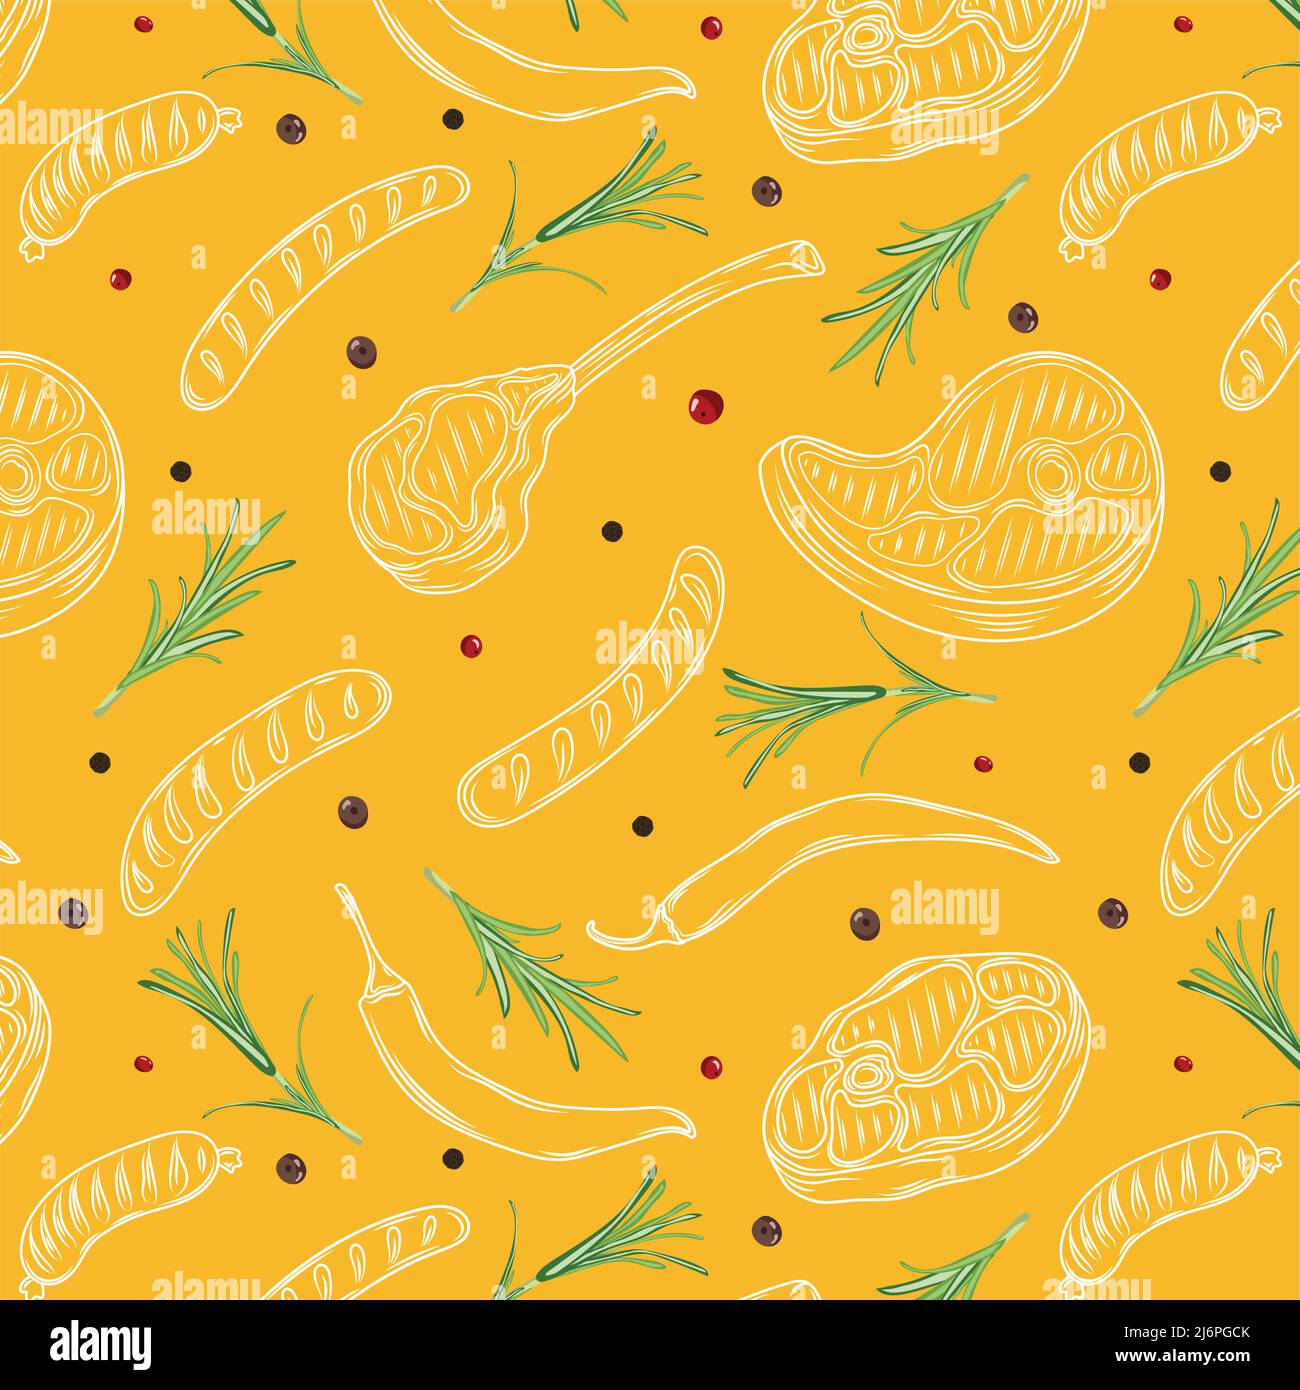 Barbecue grill seamless pattern in vintage style. Drawn by hand. Bbq party ingredients. Hot grill food, beer and tools, vegetables and spices. Vector Stock Vector